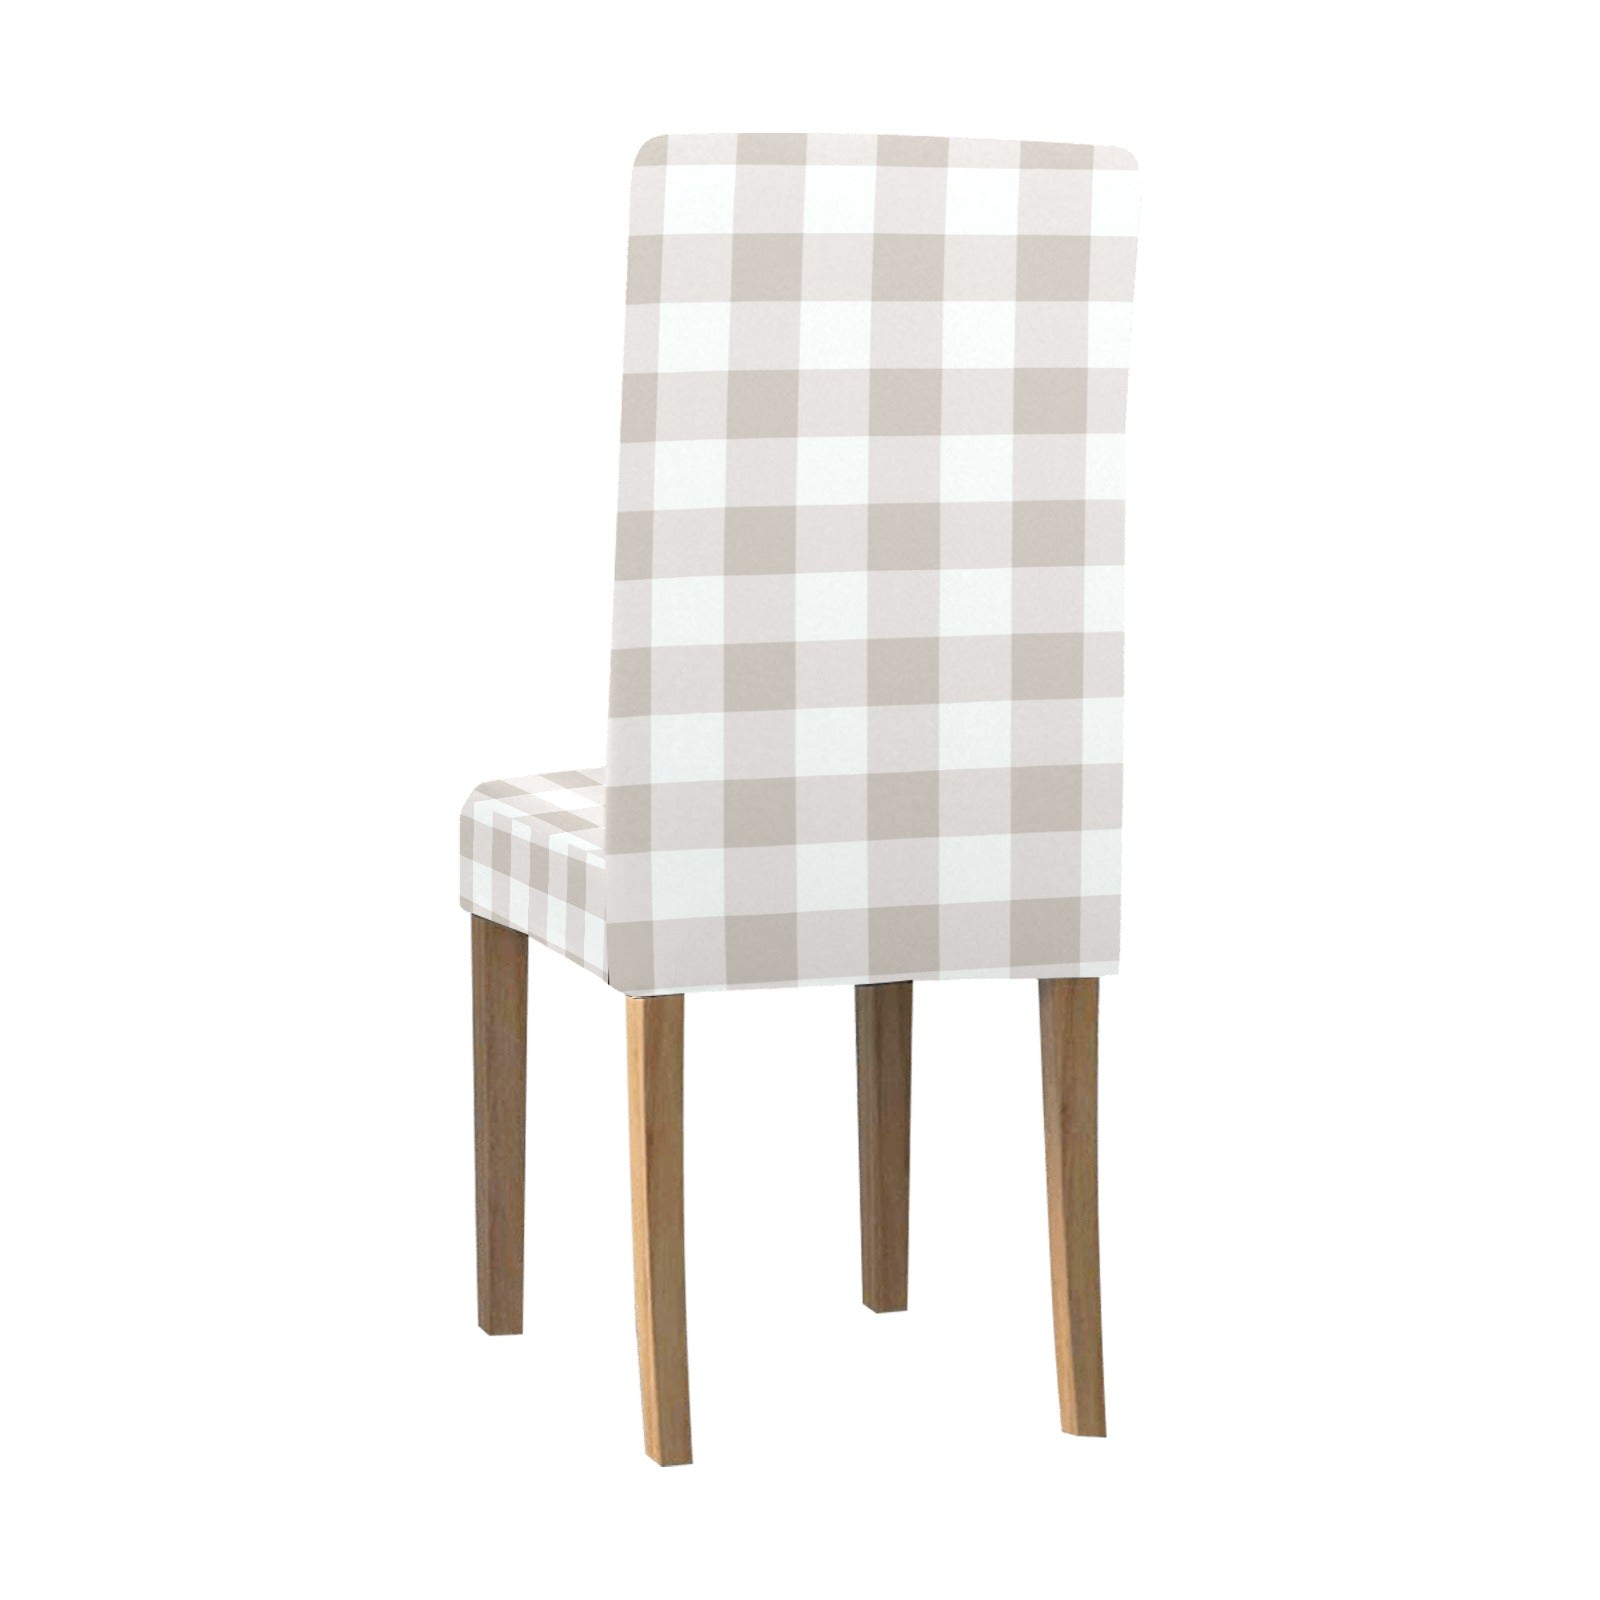 Buffalo Check Dining Chair Seat Covers, Cream Beige Light Brown Plaid Stretch Slipcover Furniture Kitchen Room Home Decor Starcove Fashion